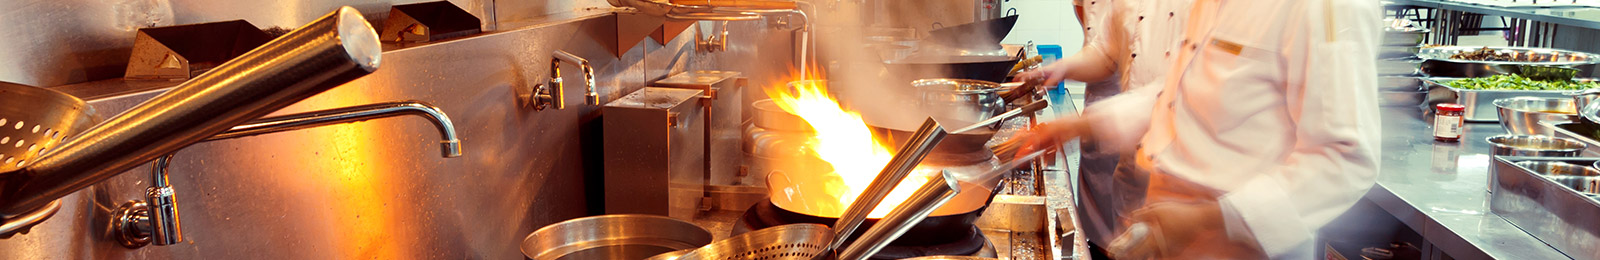 close-up of wok cooking in a professional kitchen